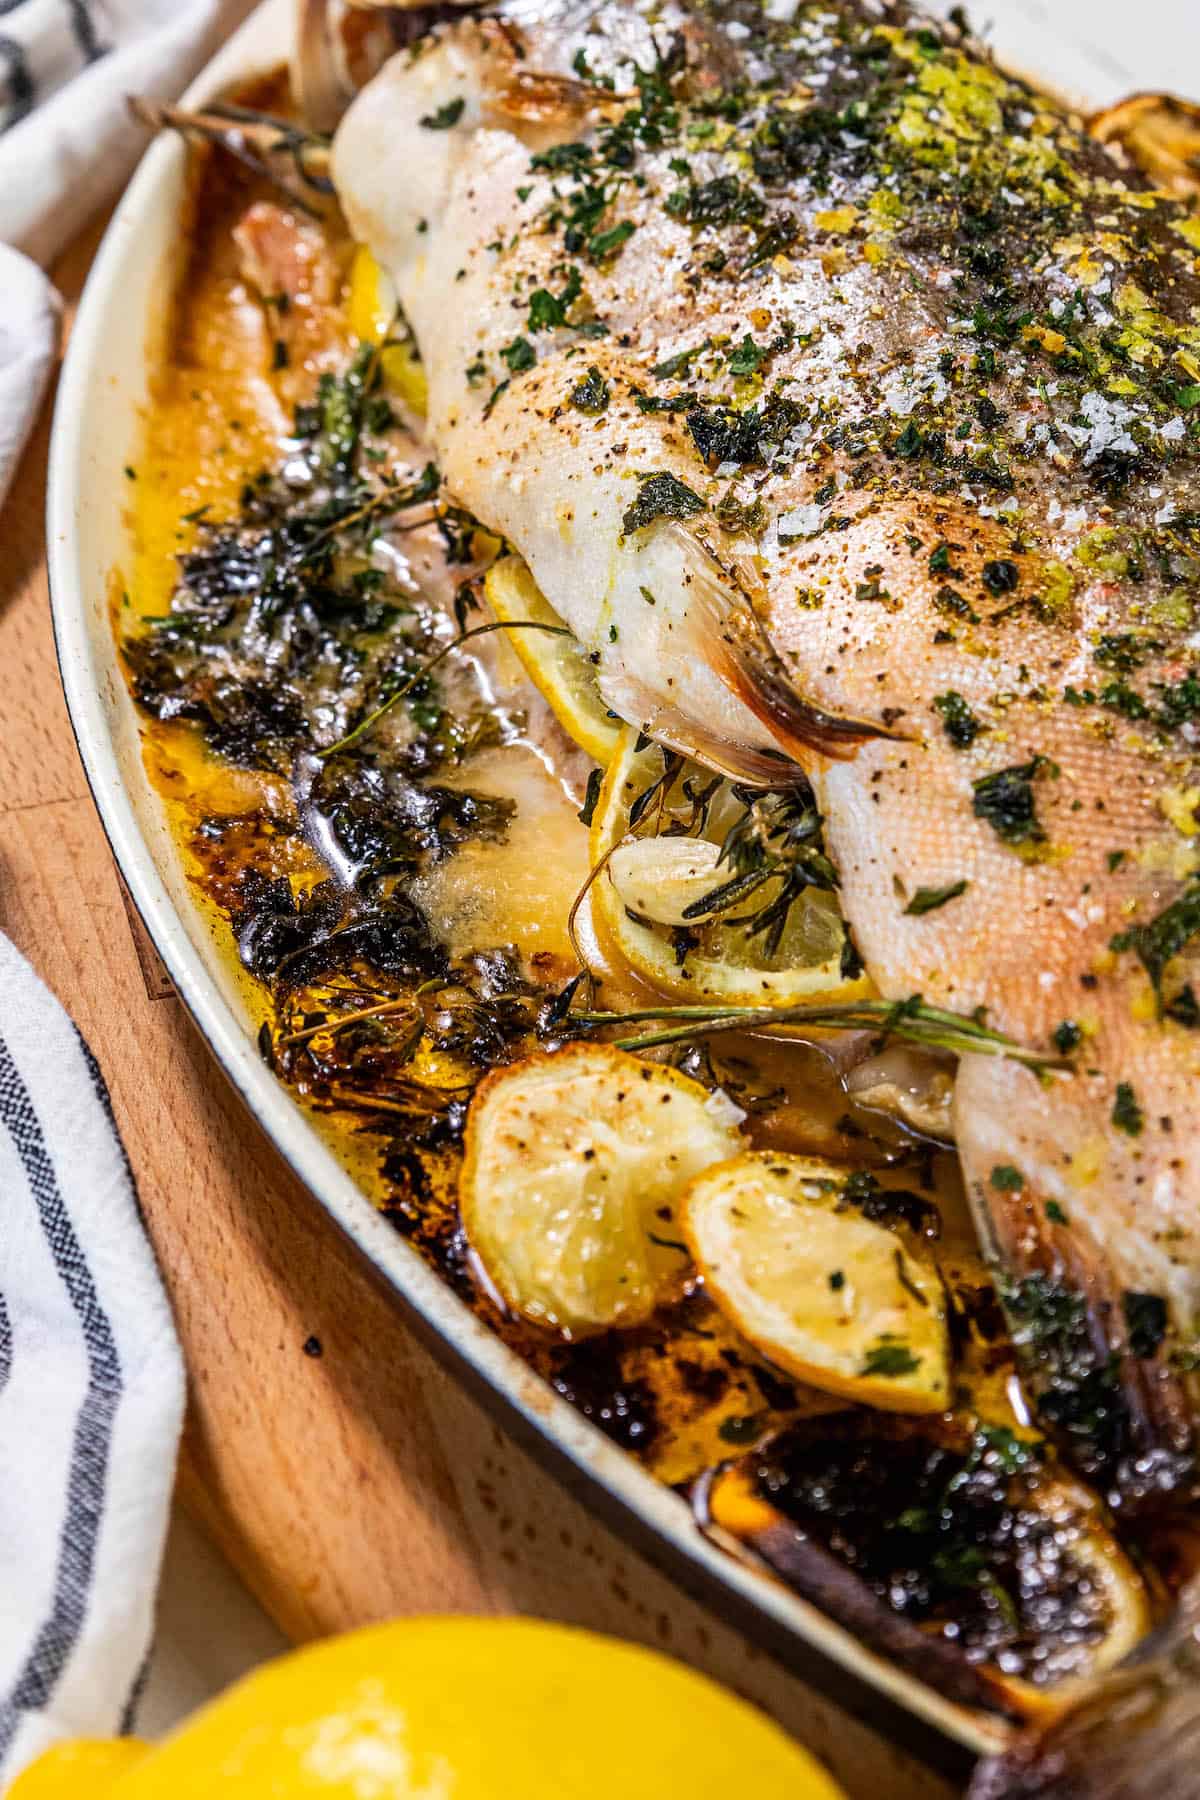 Herb-stuffed baked fish on a plate.